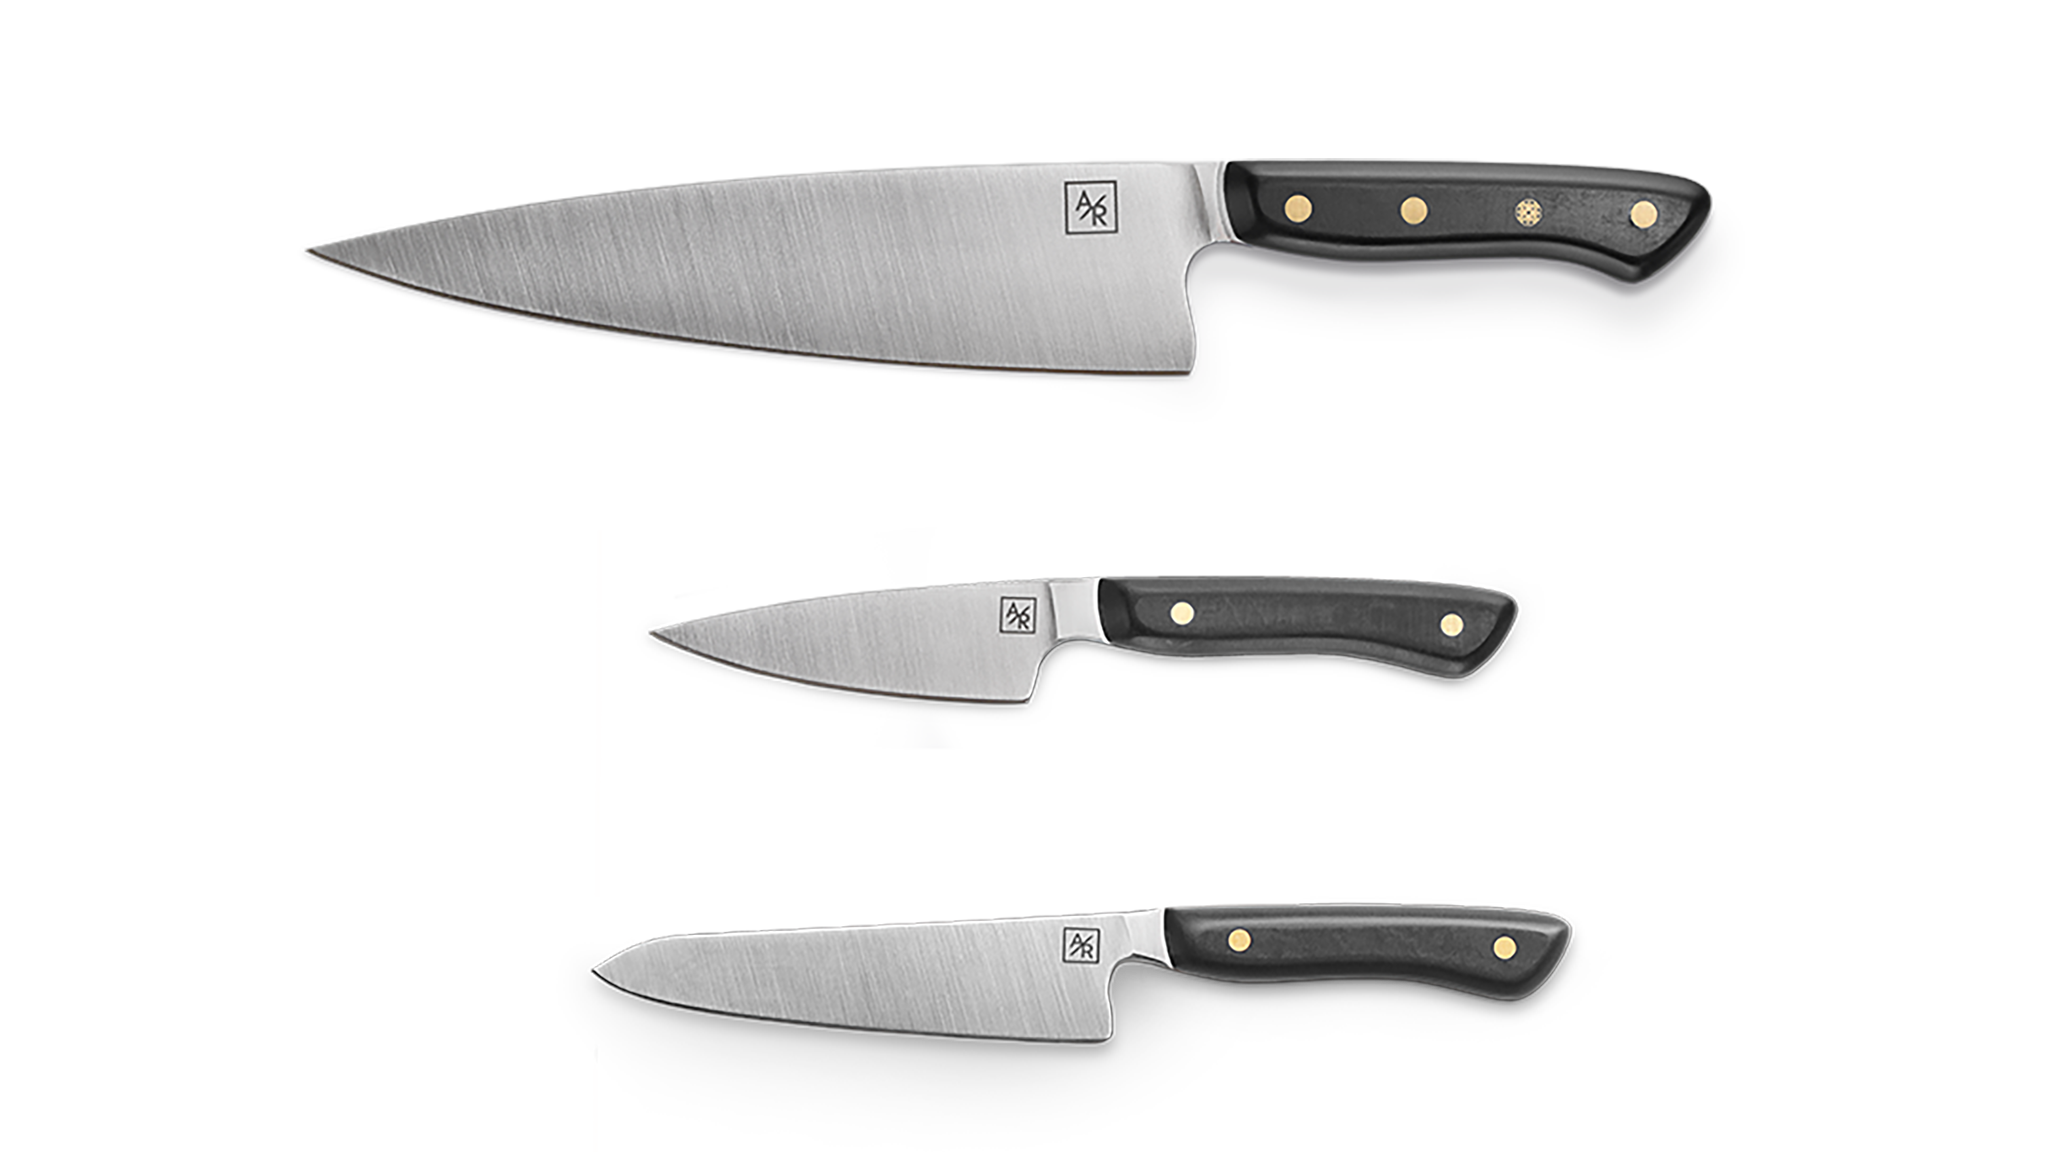 VIP Knife Set Image: Chef, Petty, and Paring